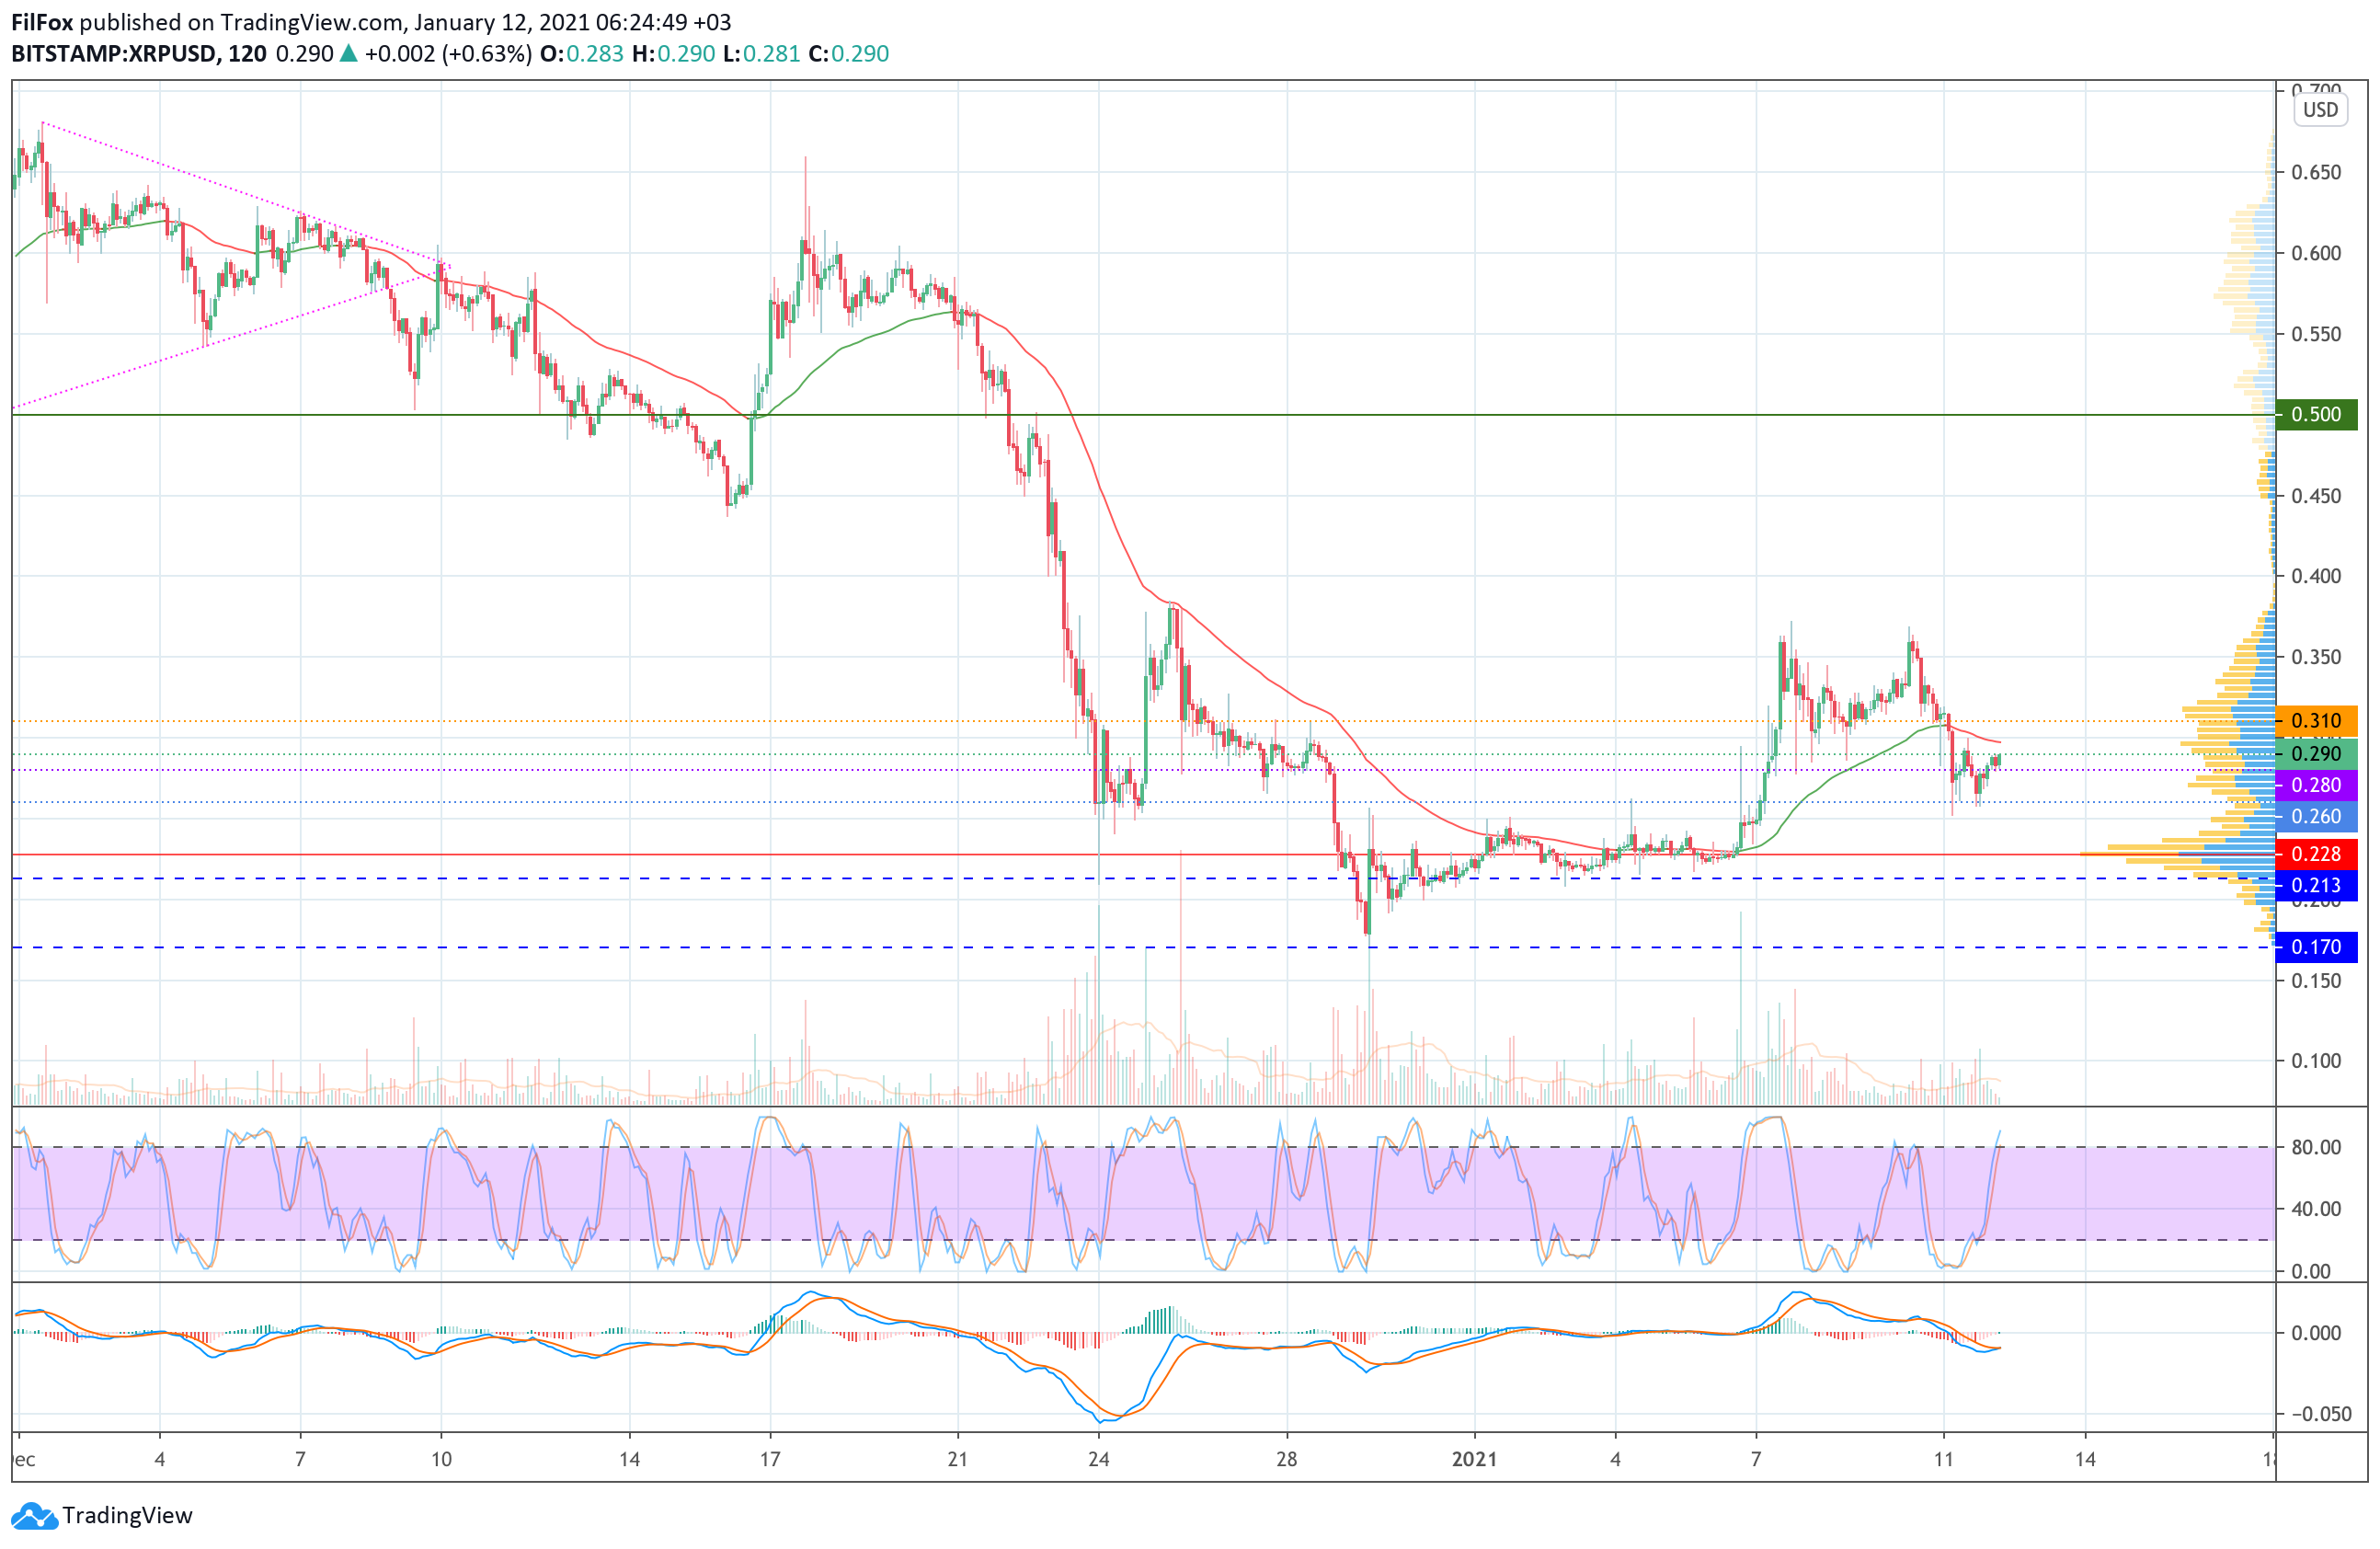 Analysis of prices for Bitcoin, Ethereum, Ripple for 01/12/2021